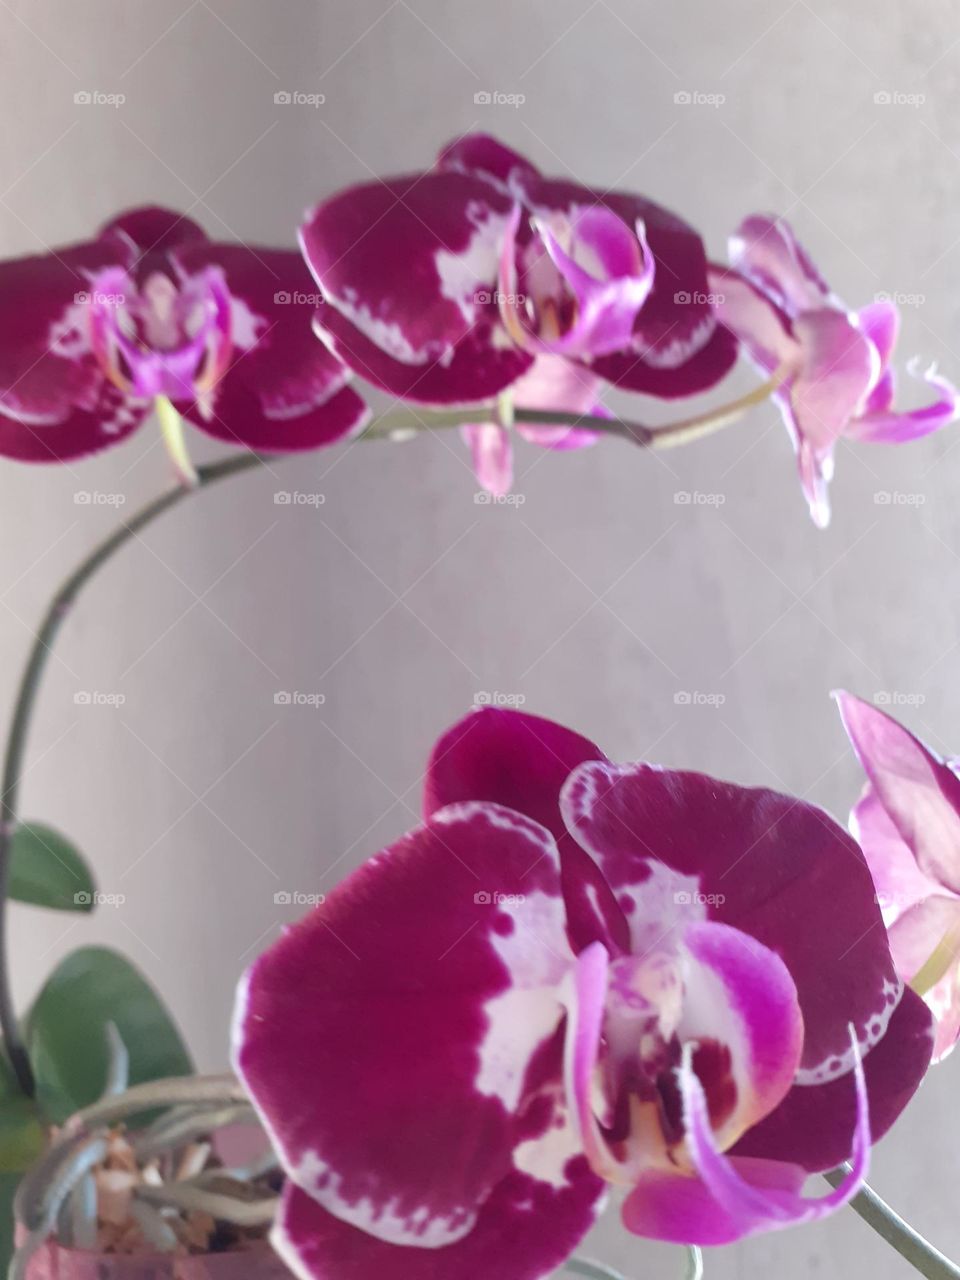 My orchids.